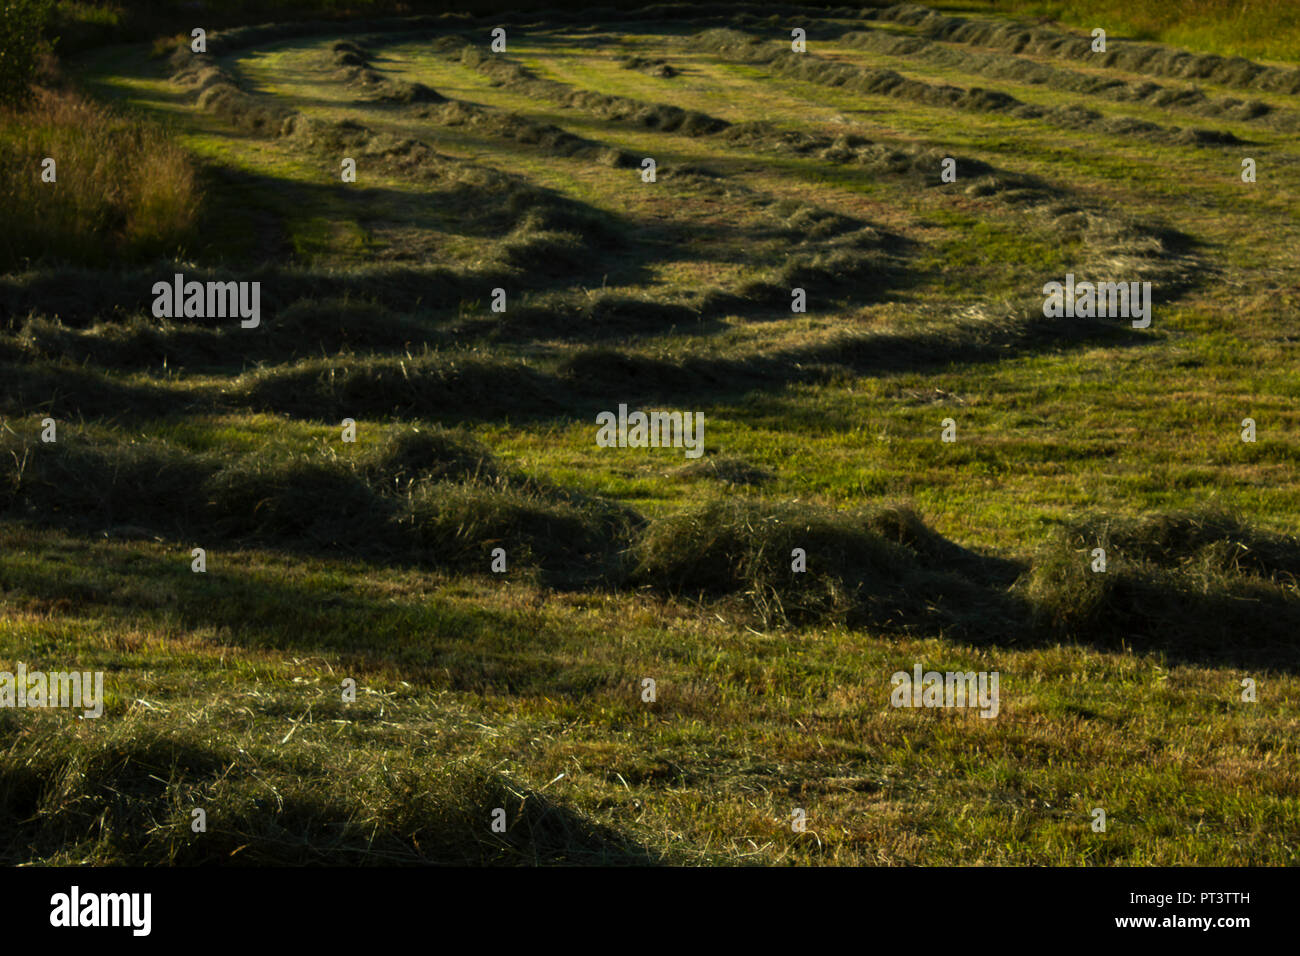 Rows of hay in an 'S' shape in a field and dawn. Stock Photo